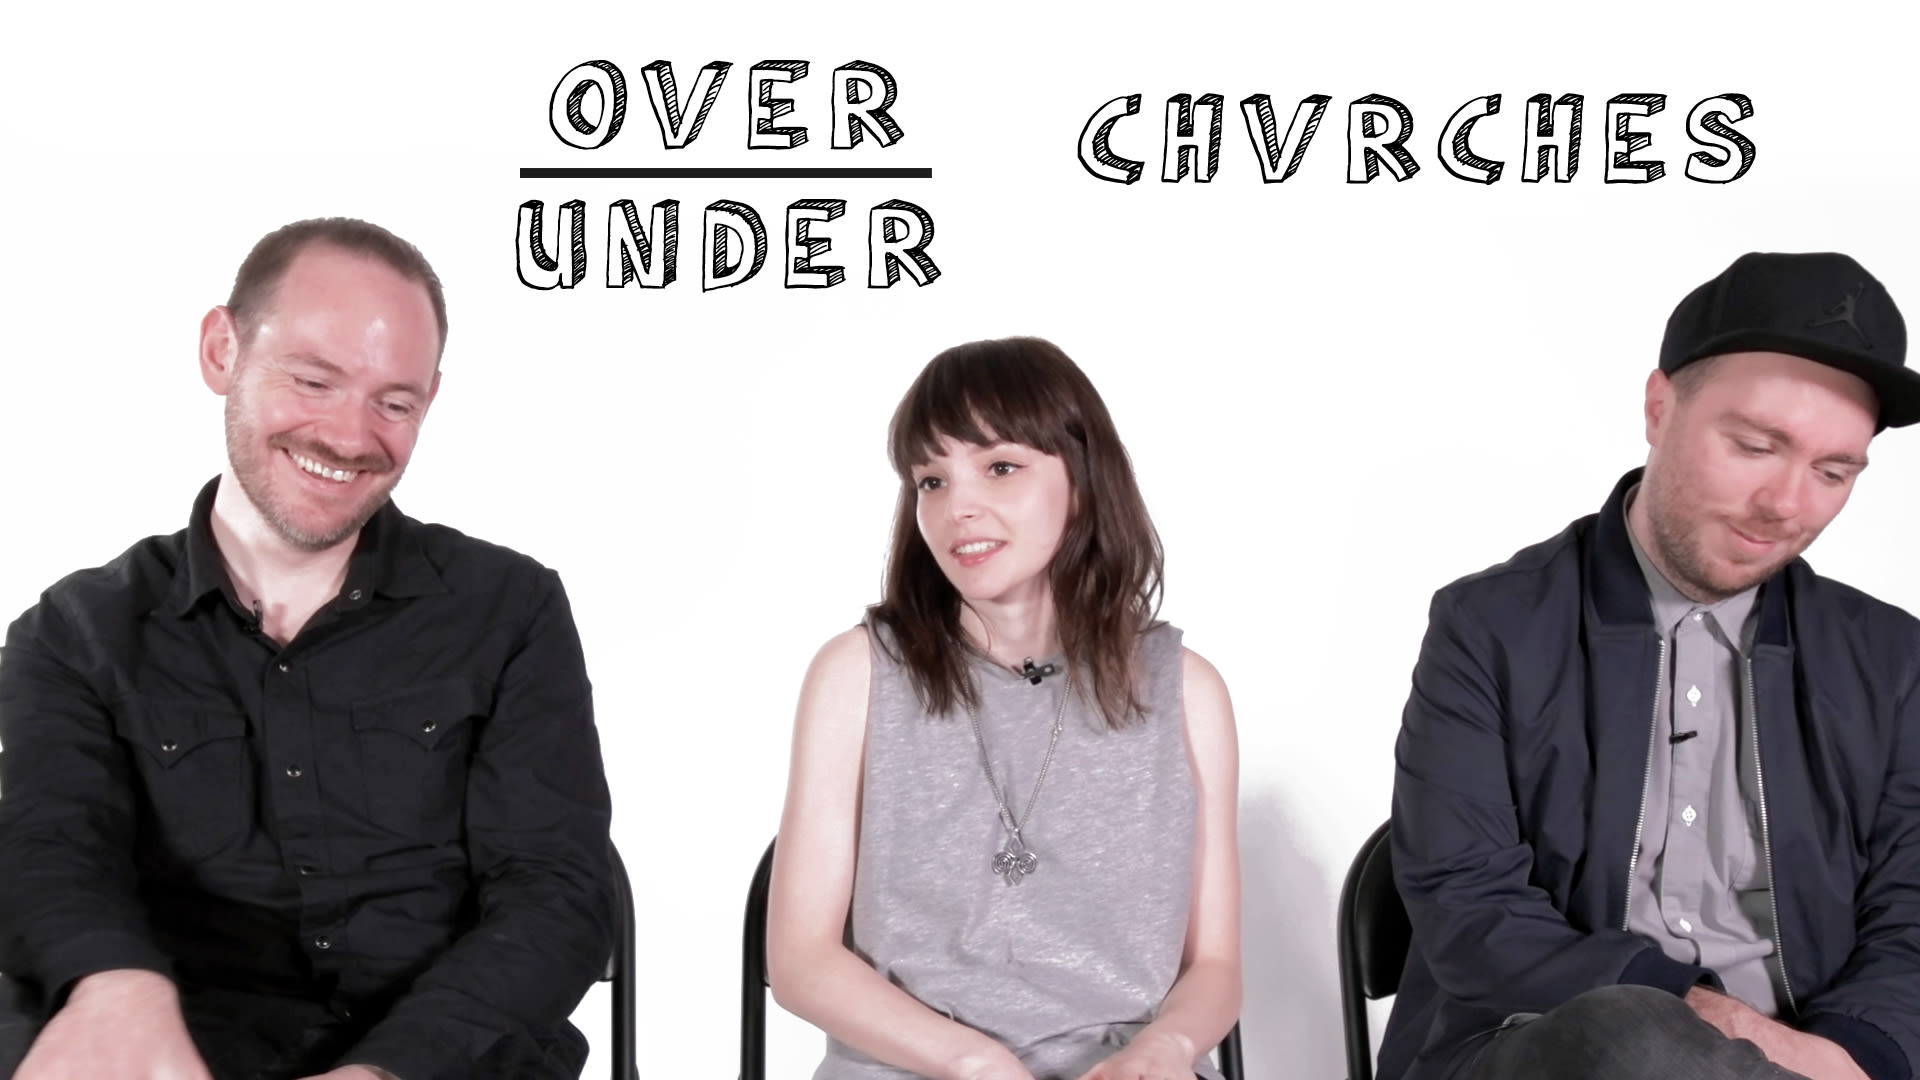 Watch Chvrches Rate Donald Trump, Ja Rule and Rollerblading Over/Under Over/Under Pitchfork image